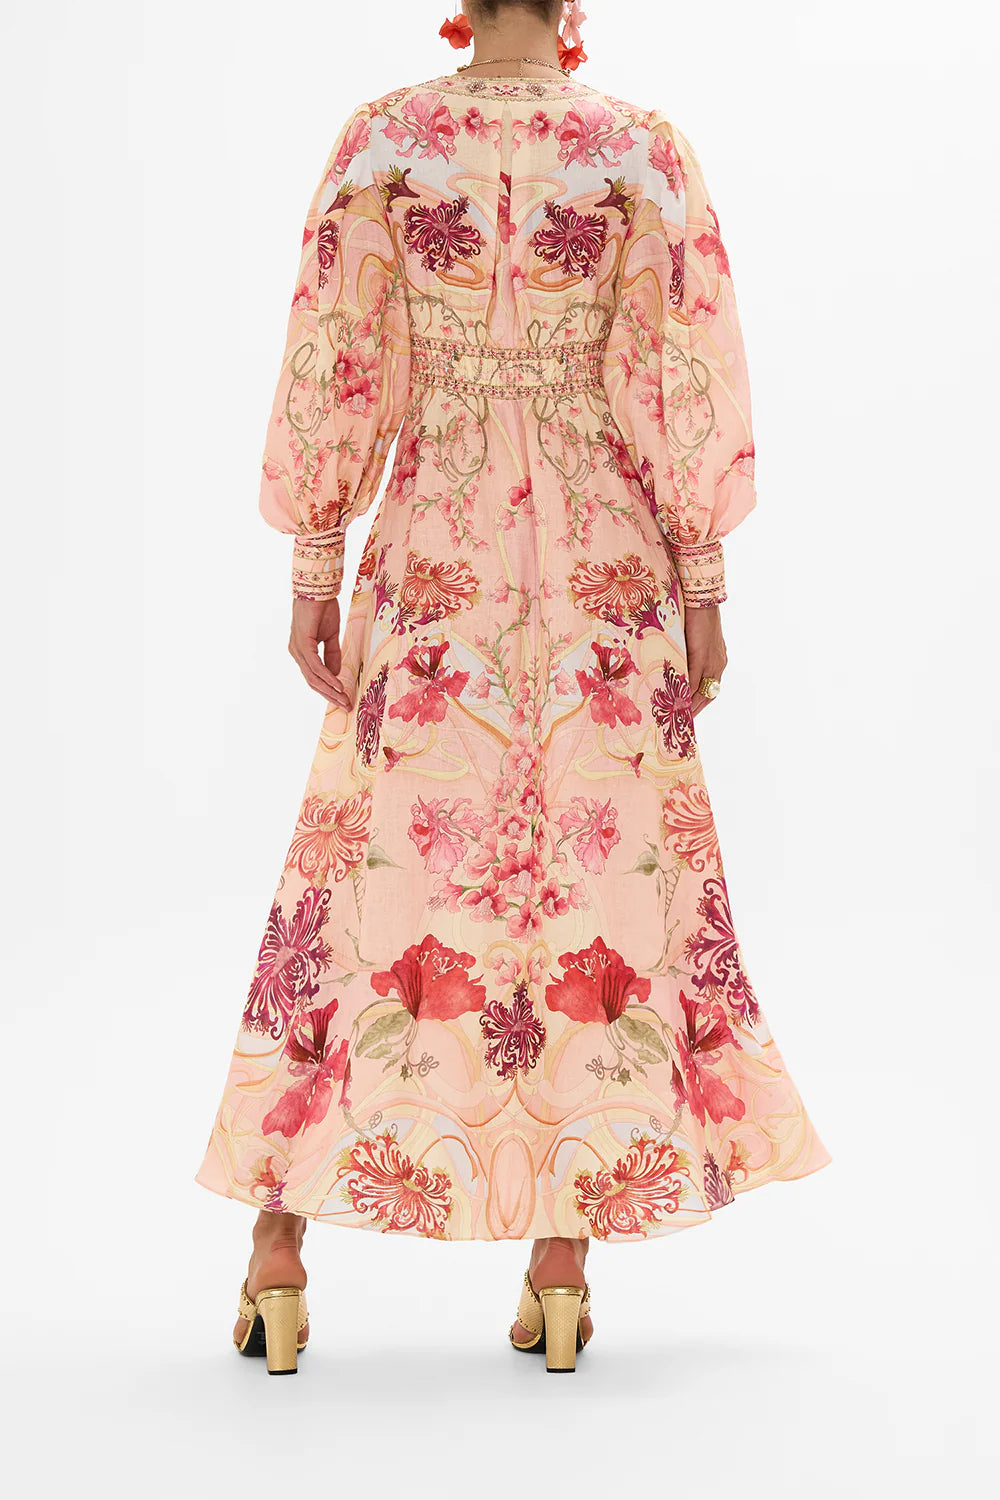 Shaped Waistband Dress with Gathered Sleeves - Blossoms And Brushstrokes